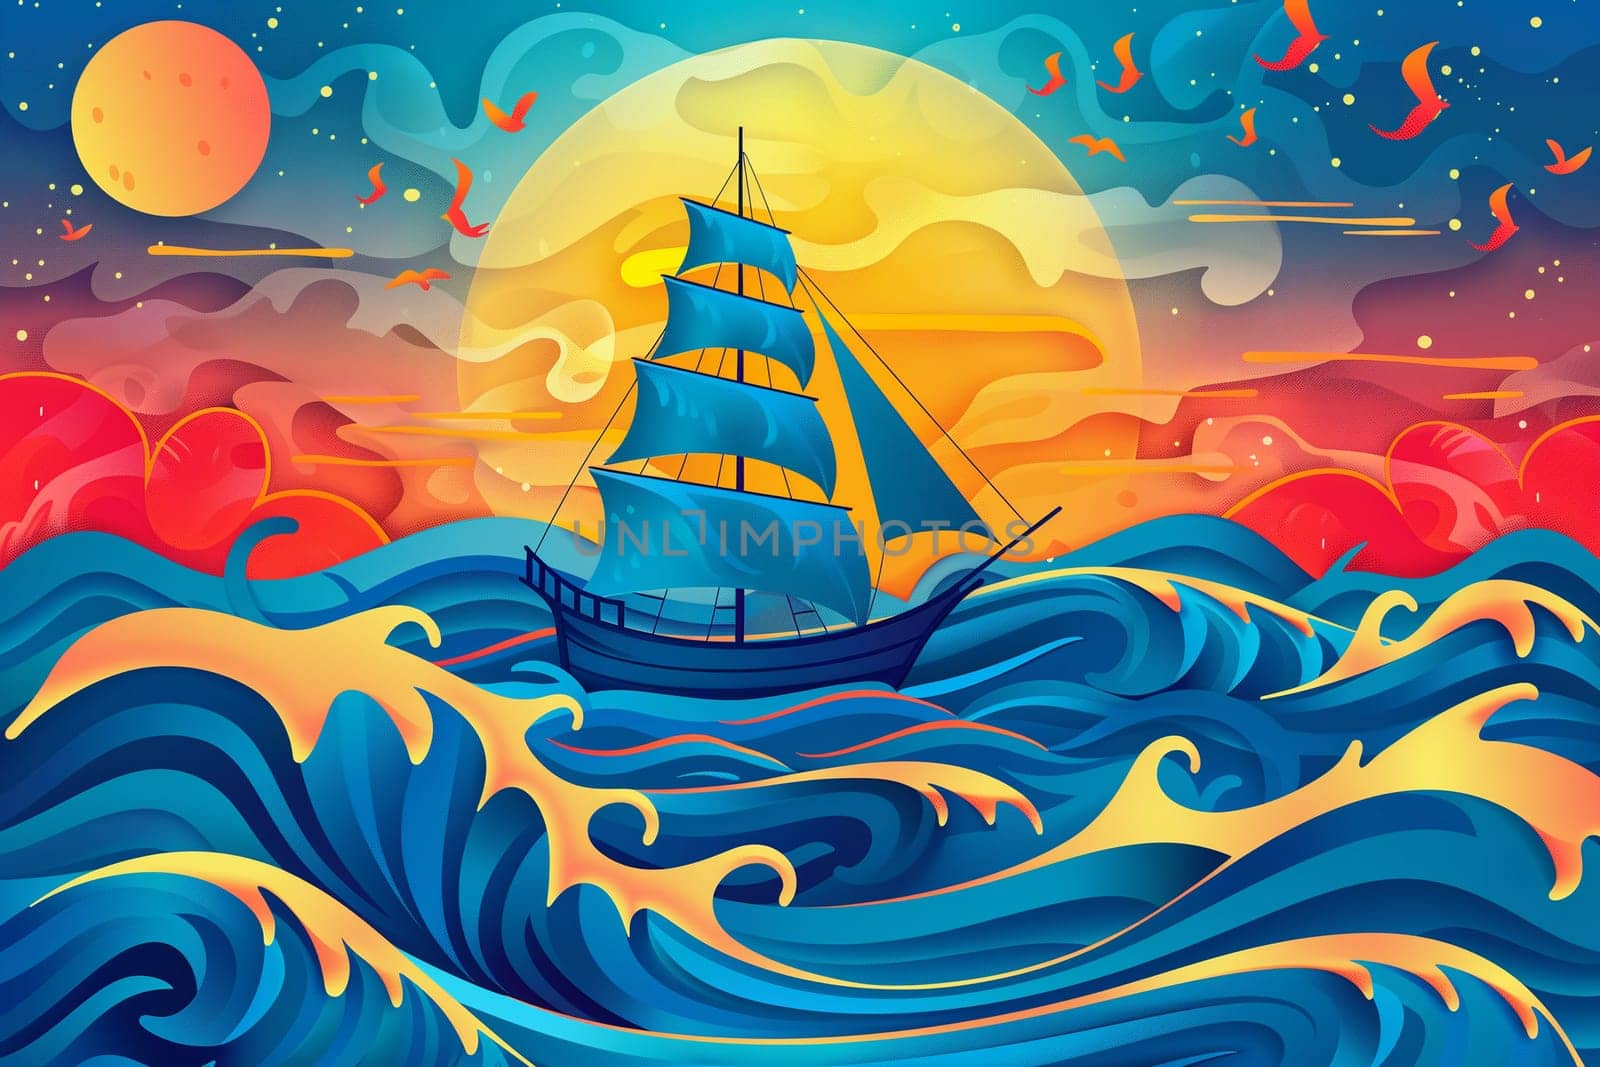 A painting depicting a sailboat gliding through the waves on the open ocean.